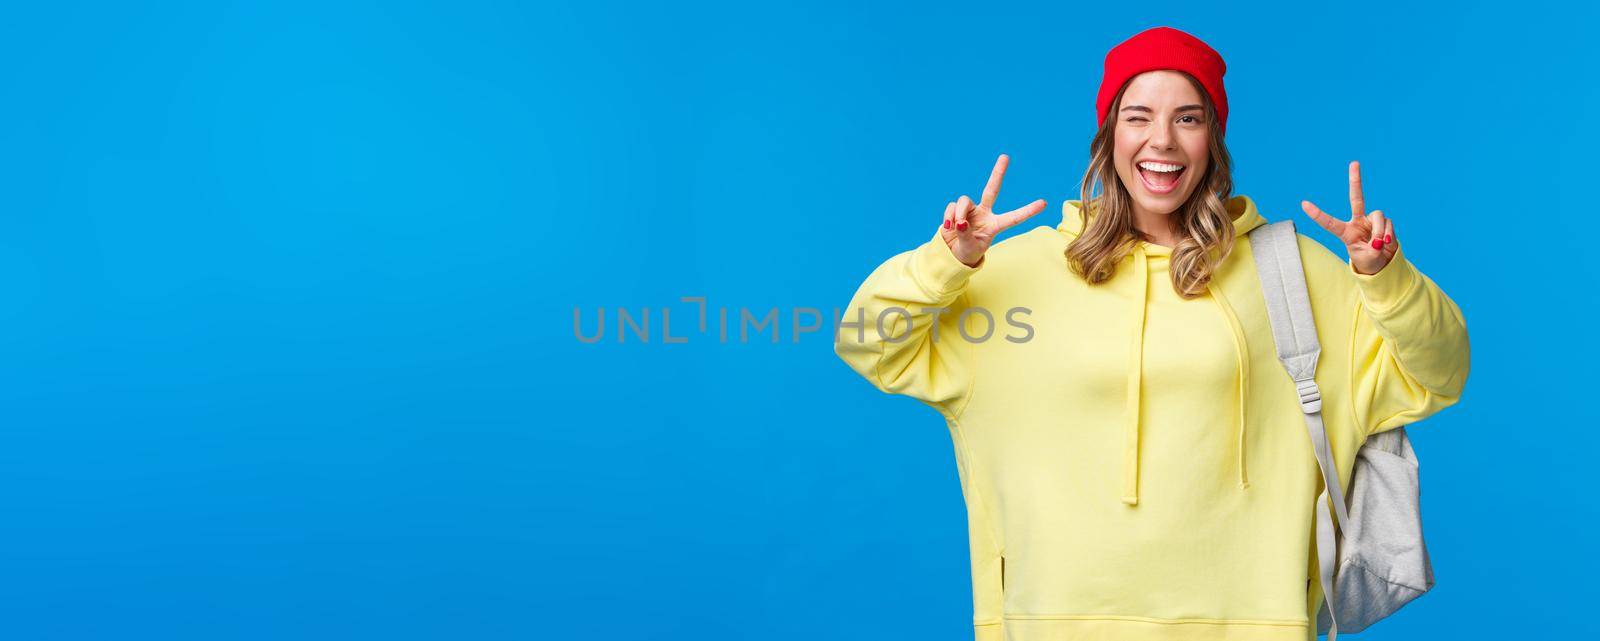 Back to school concept. Cheerful hipster girl with blond hair in beanie, carry backpack, wink carefree and smiling, showing peace gesture send positive vibes, stand blue background.